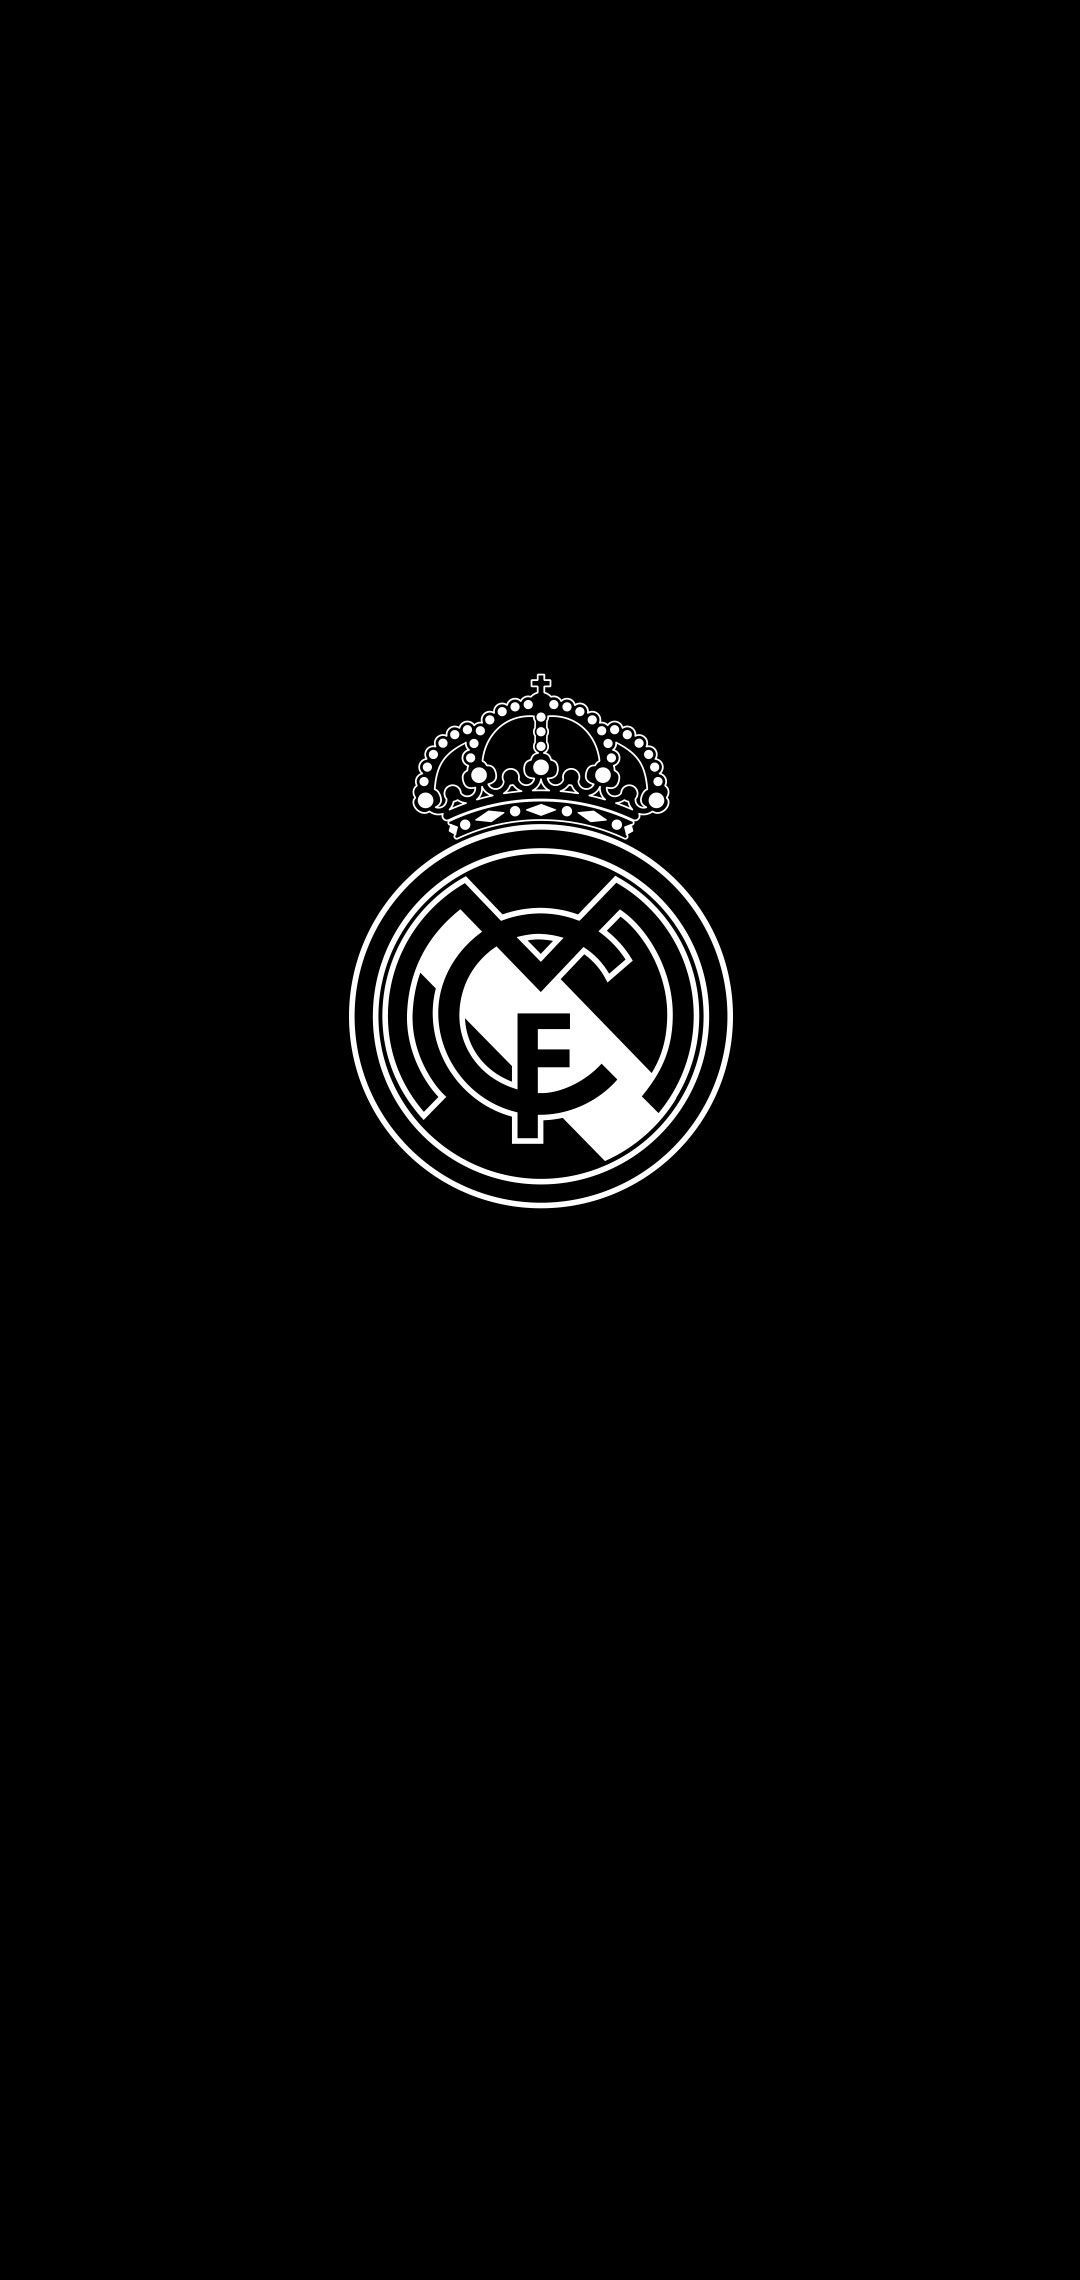 1080x2280 Real Madrid Black Wallpapers Top Free Real Madrid Black Backgrounds